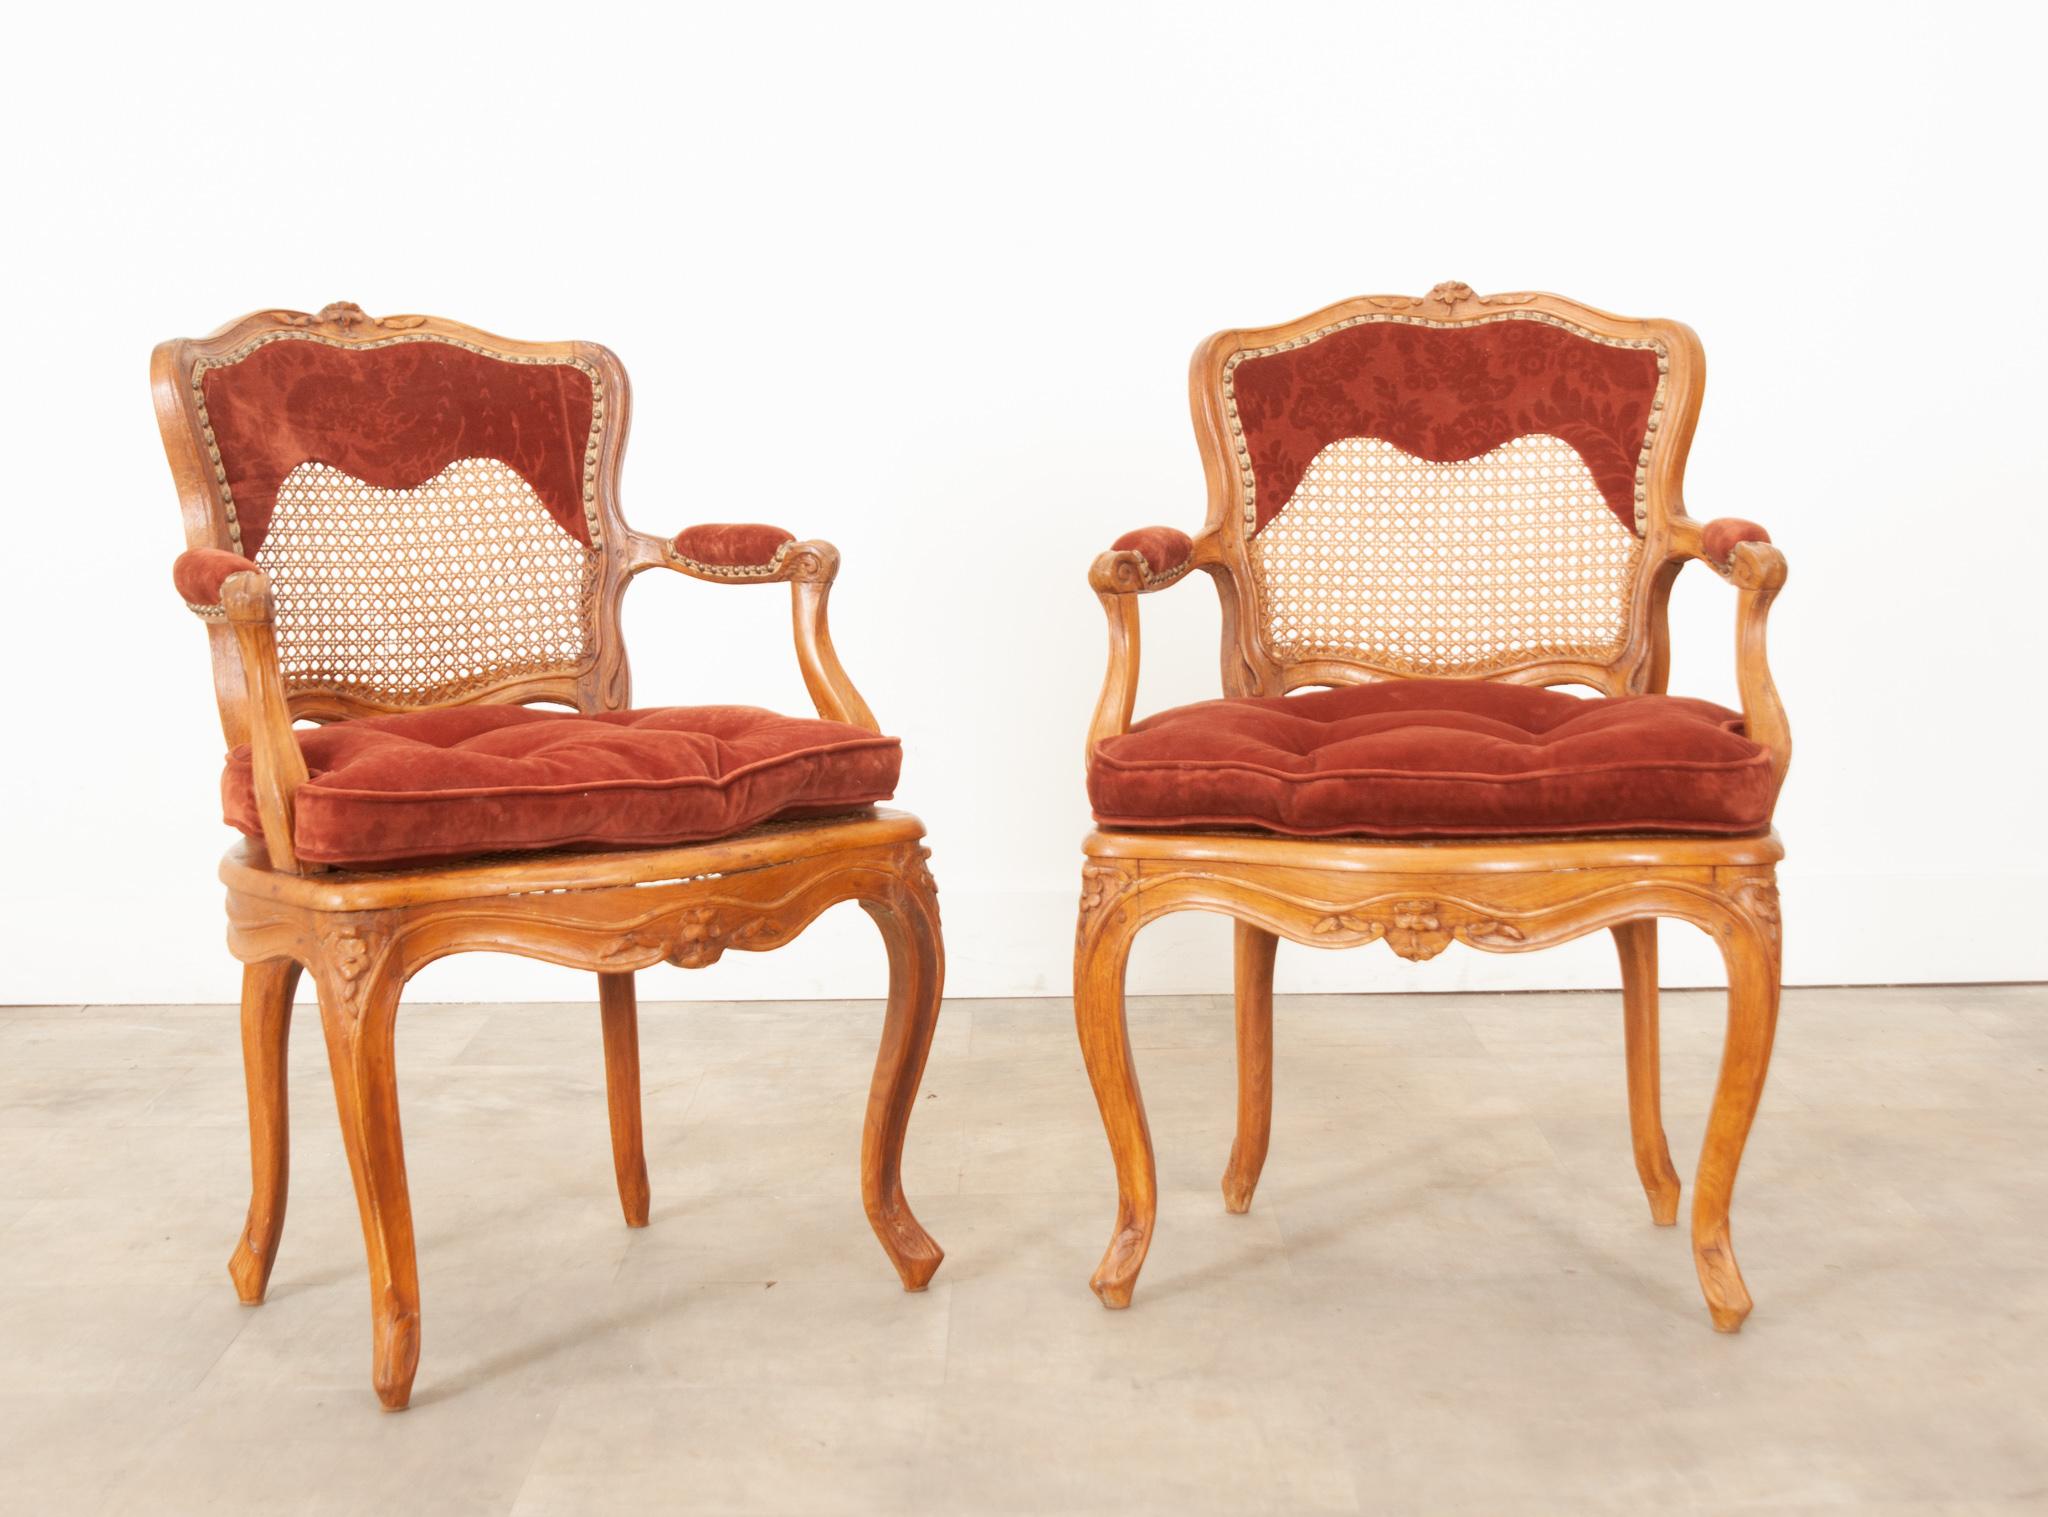 Pair of French 18th Century Louis XV Style  Fauteuils In Good Condition For Sale In Baton Rouge, LA